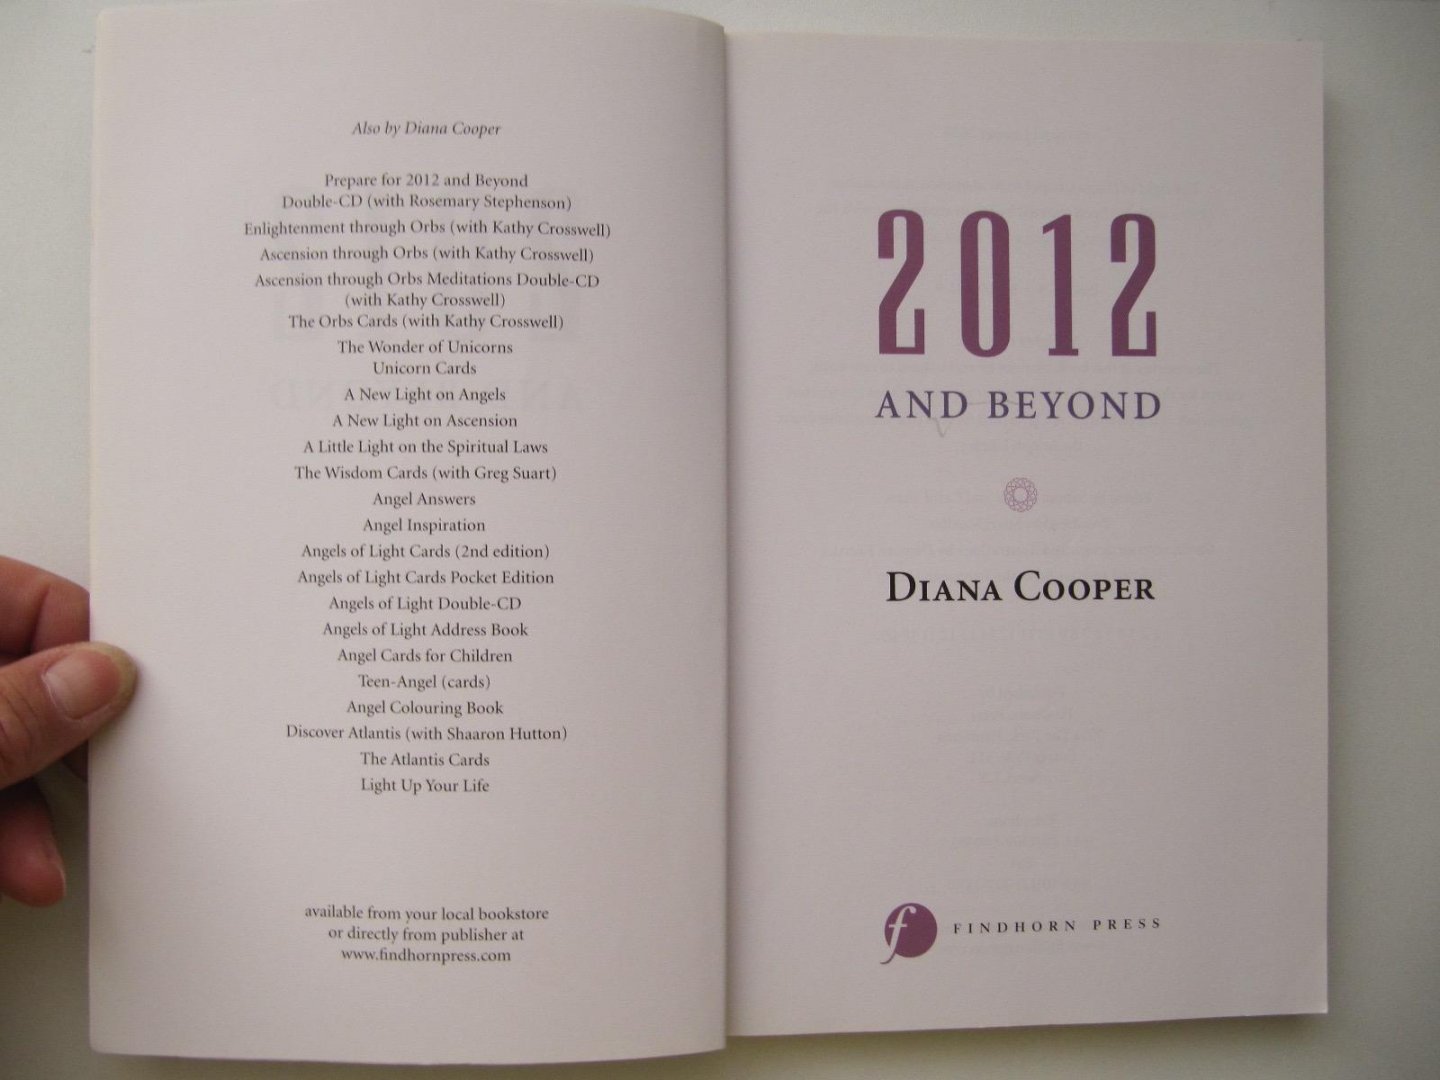 Cooper, Diana - 2012 and Beyond / An Invitation to Meet the Challenges and Opportunities Ahead